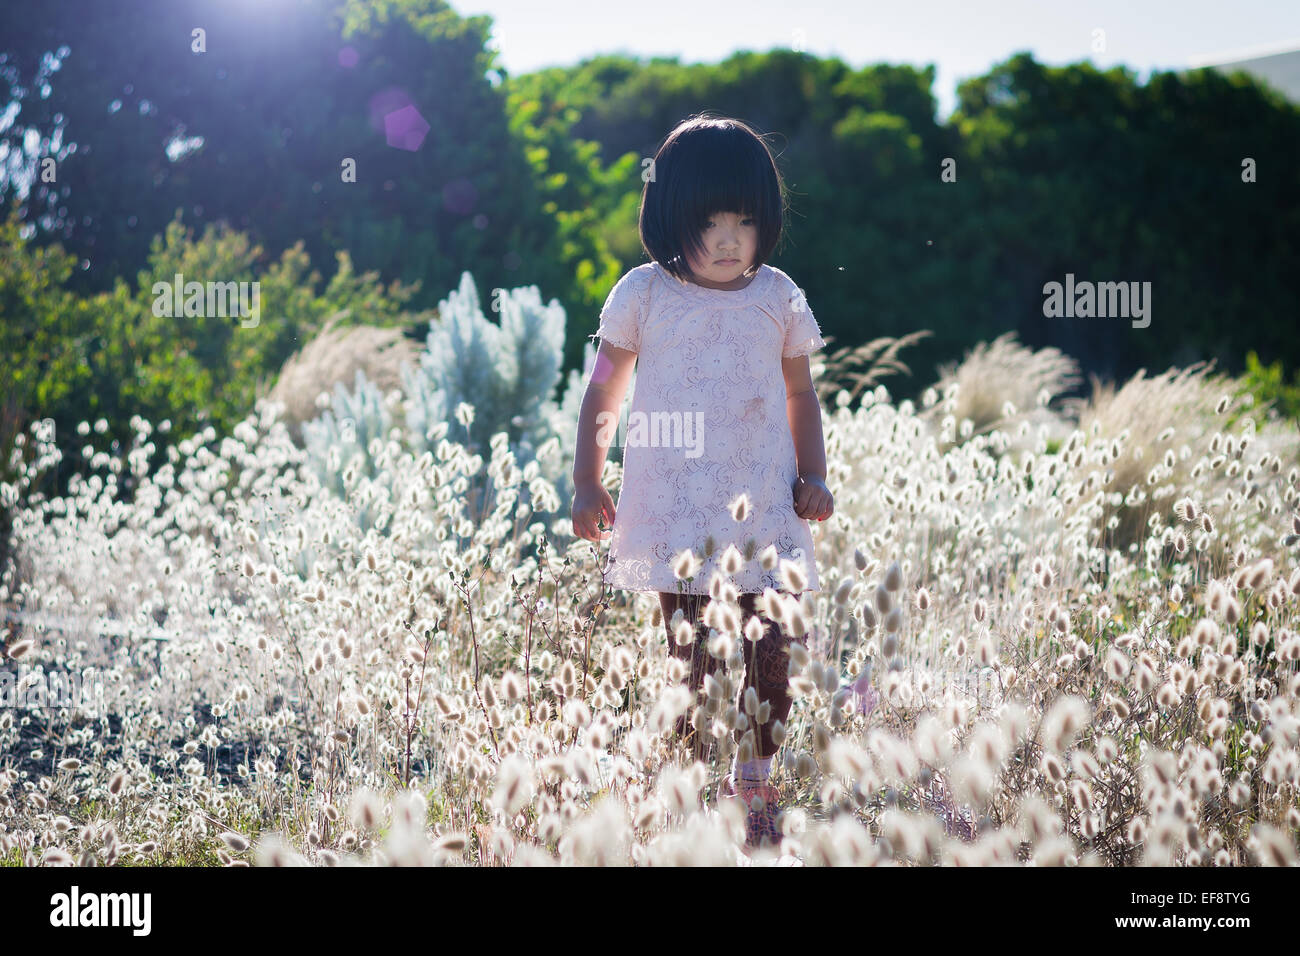 Small girl wearing white dress walking in field with high blossoming grass, trees in background Stock Photo